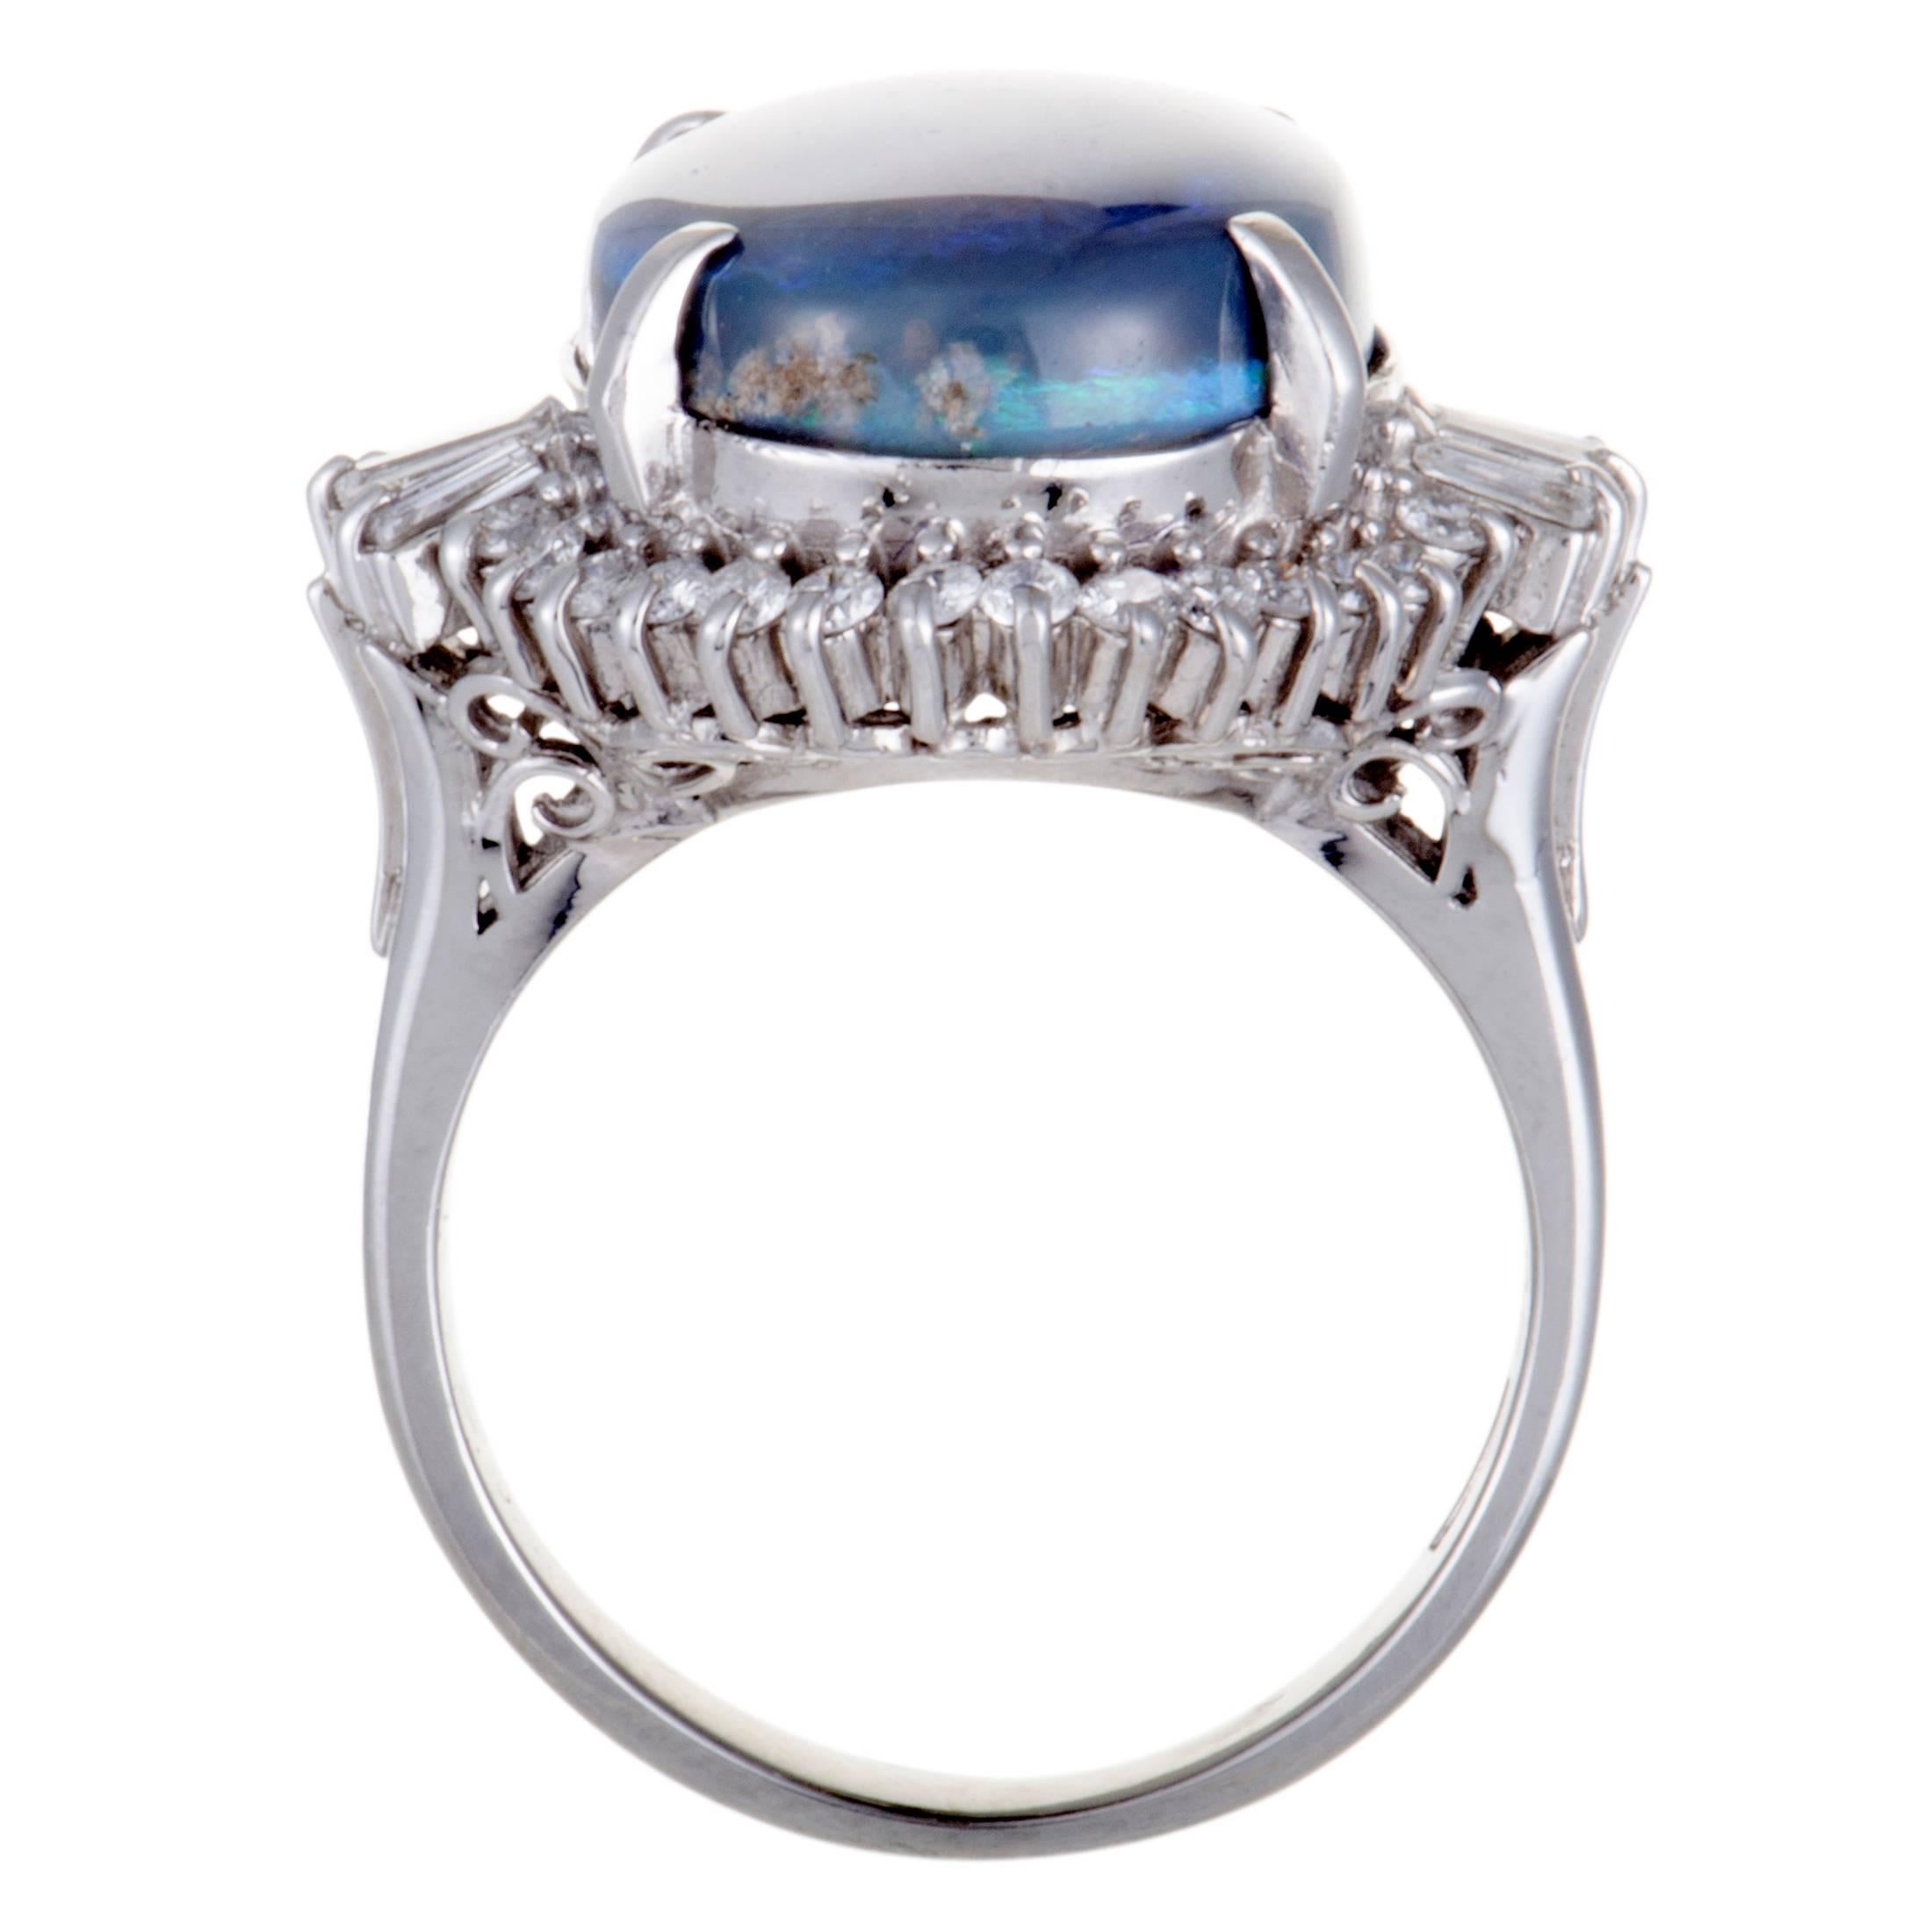 The eye-catching milky blue opal takes the central place in this ravishing platinum ring and is accentuated in the most luxurious manner by incredibly glistening and diversely cut diamond stones. The diamonds amount to 1.25 carats and the opal